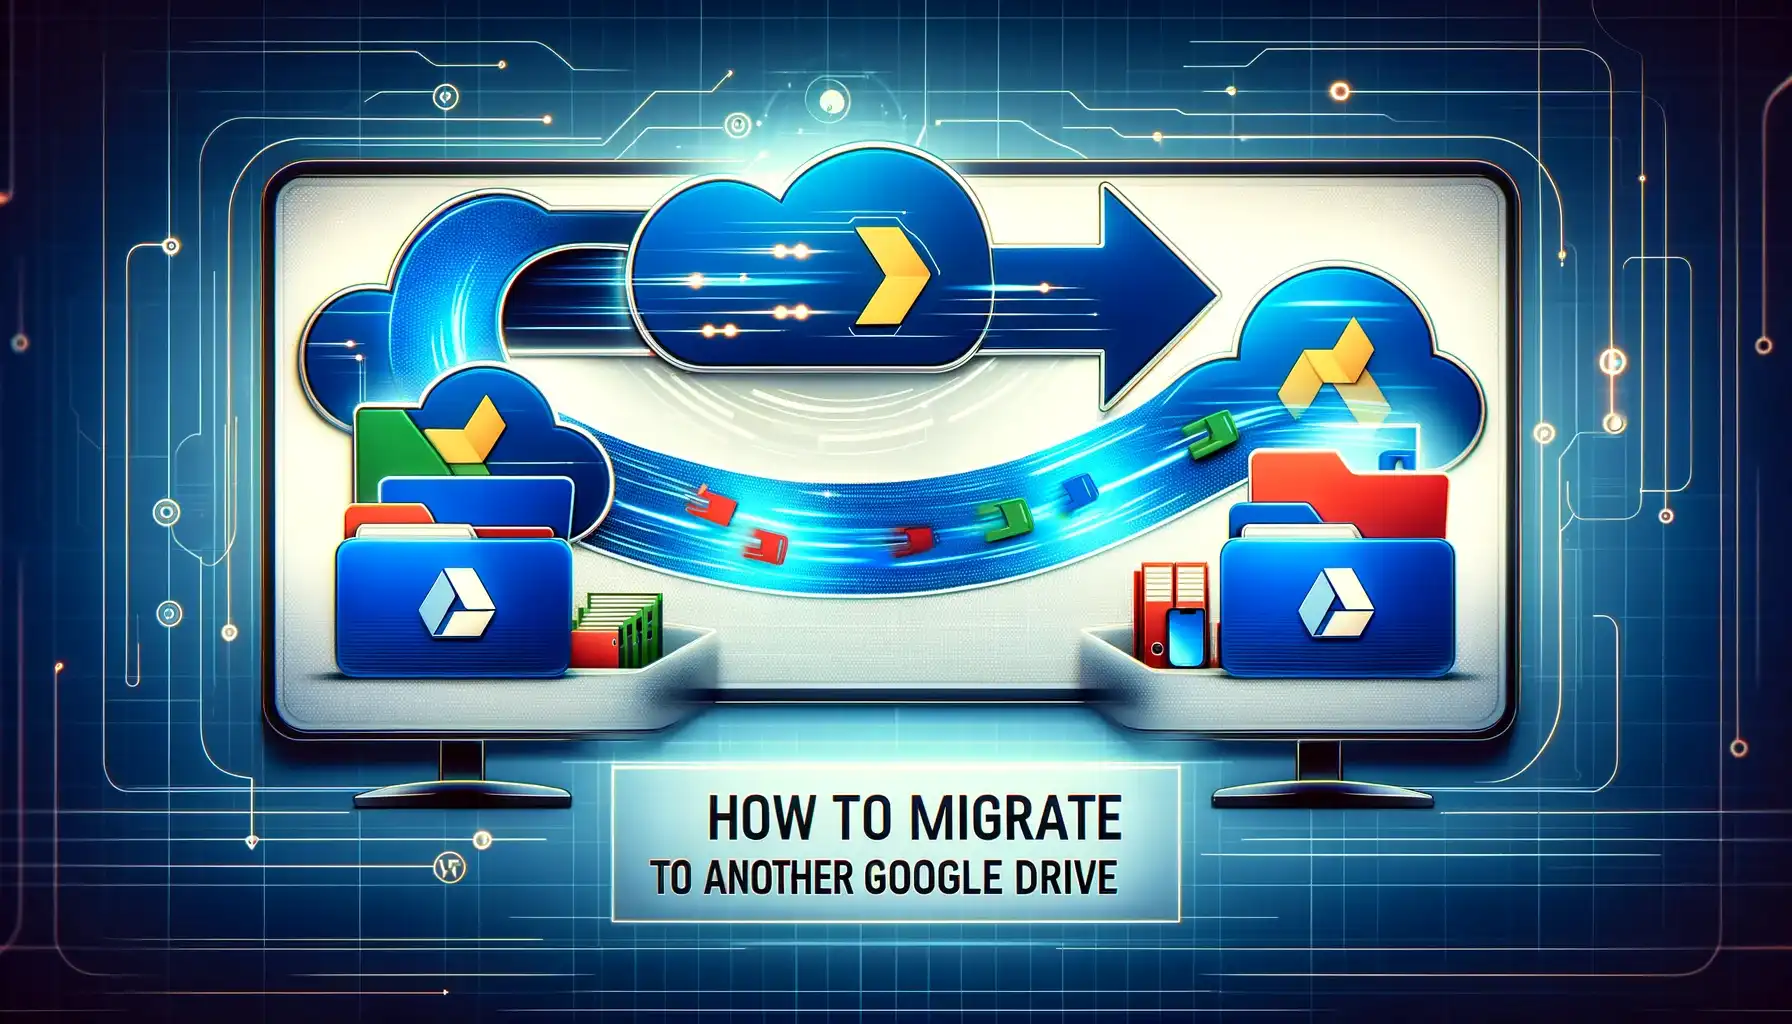 How to Migrate Google Drive to Another Google Drive